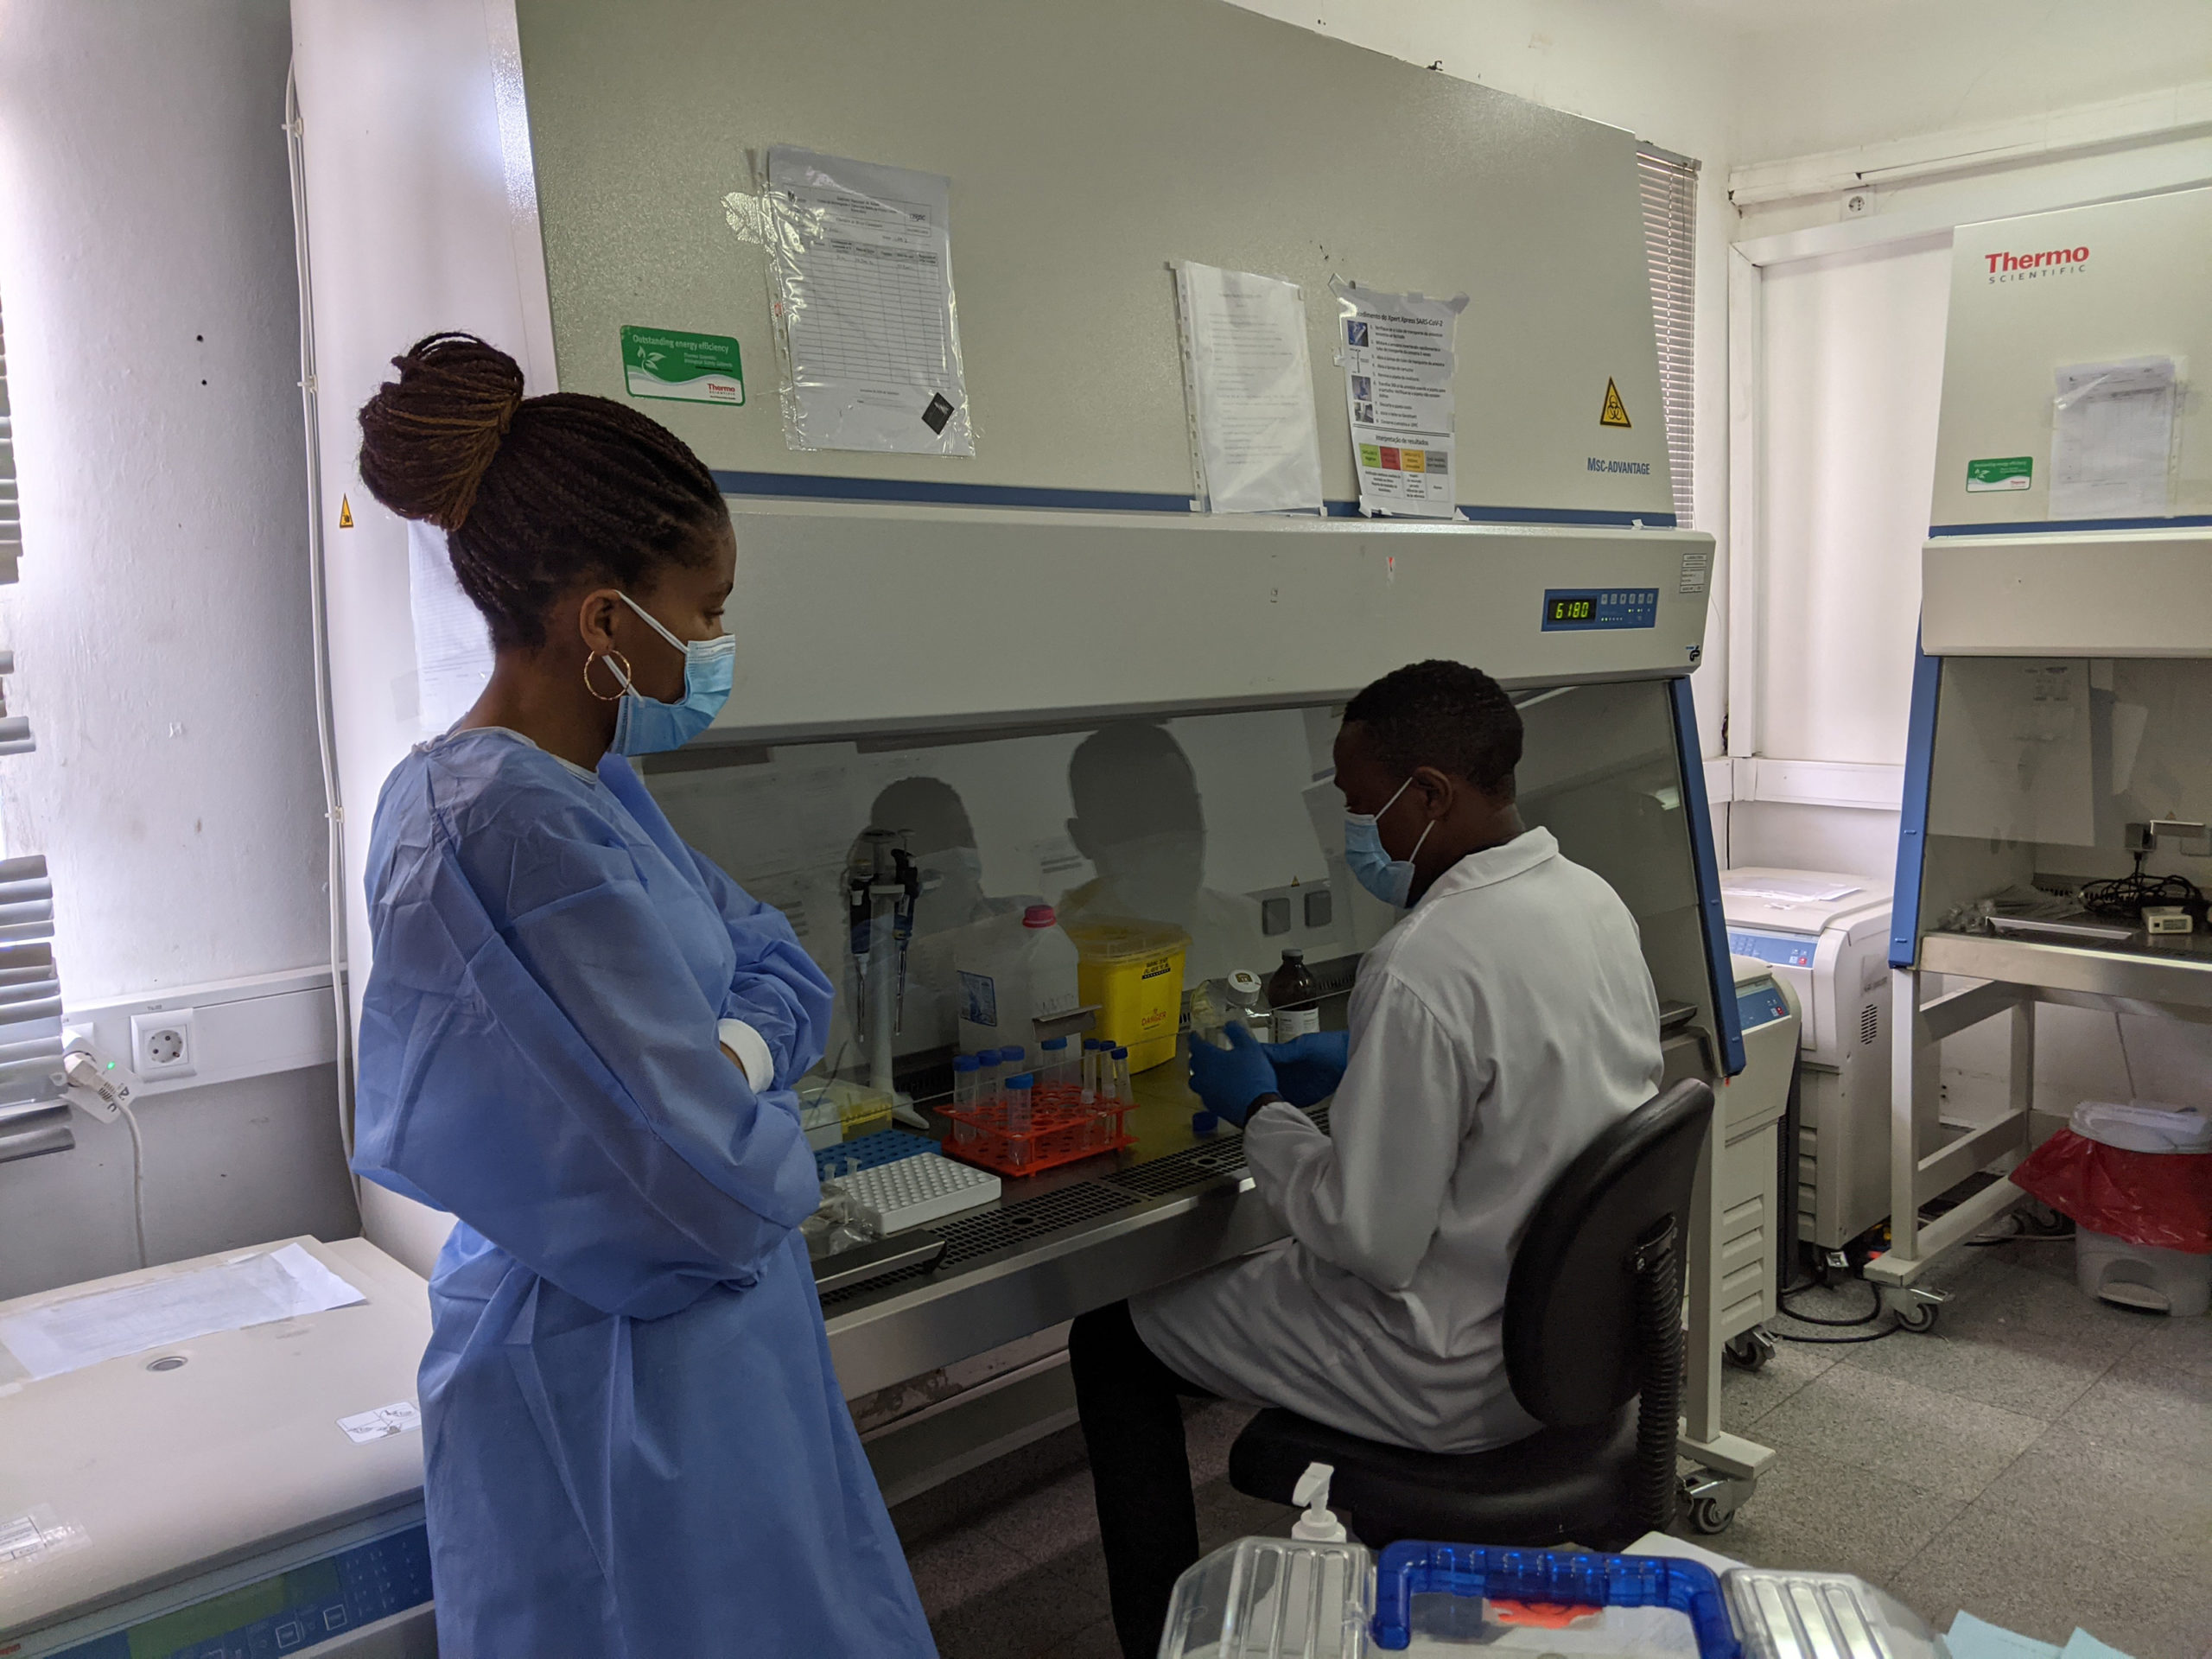 Healthcare workers in lab setting